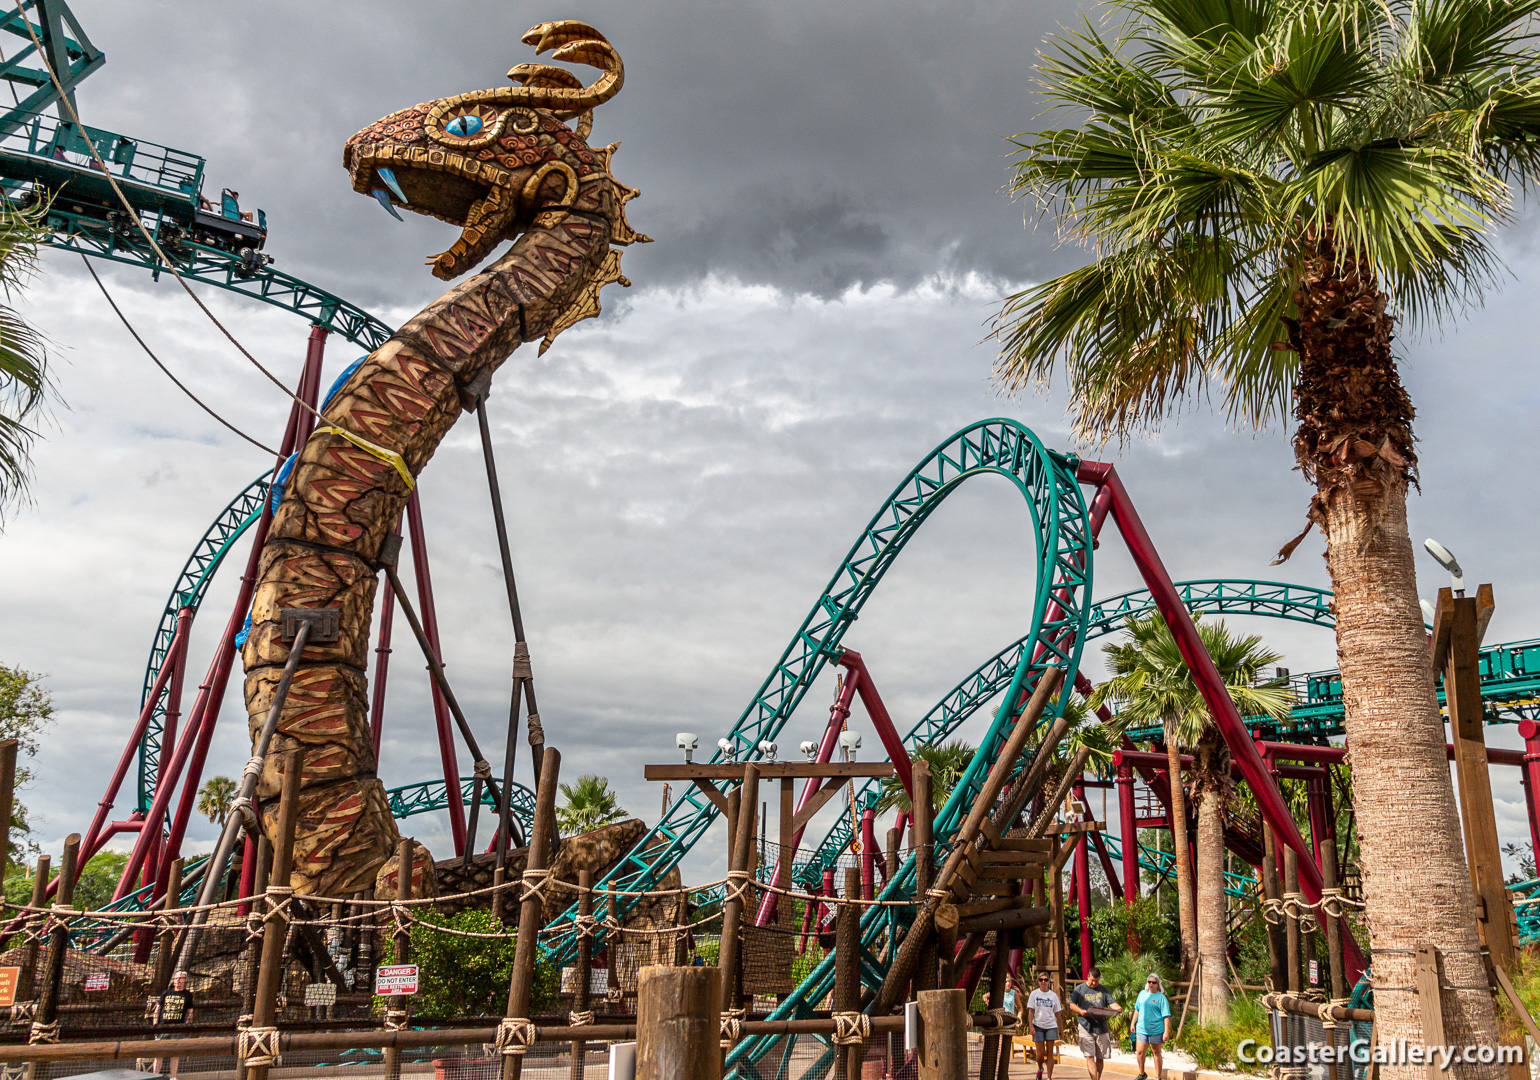 Pictures and videos of the Cobra's Curse roller coaster in Tampa, Florida